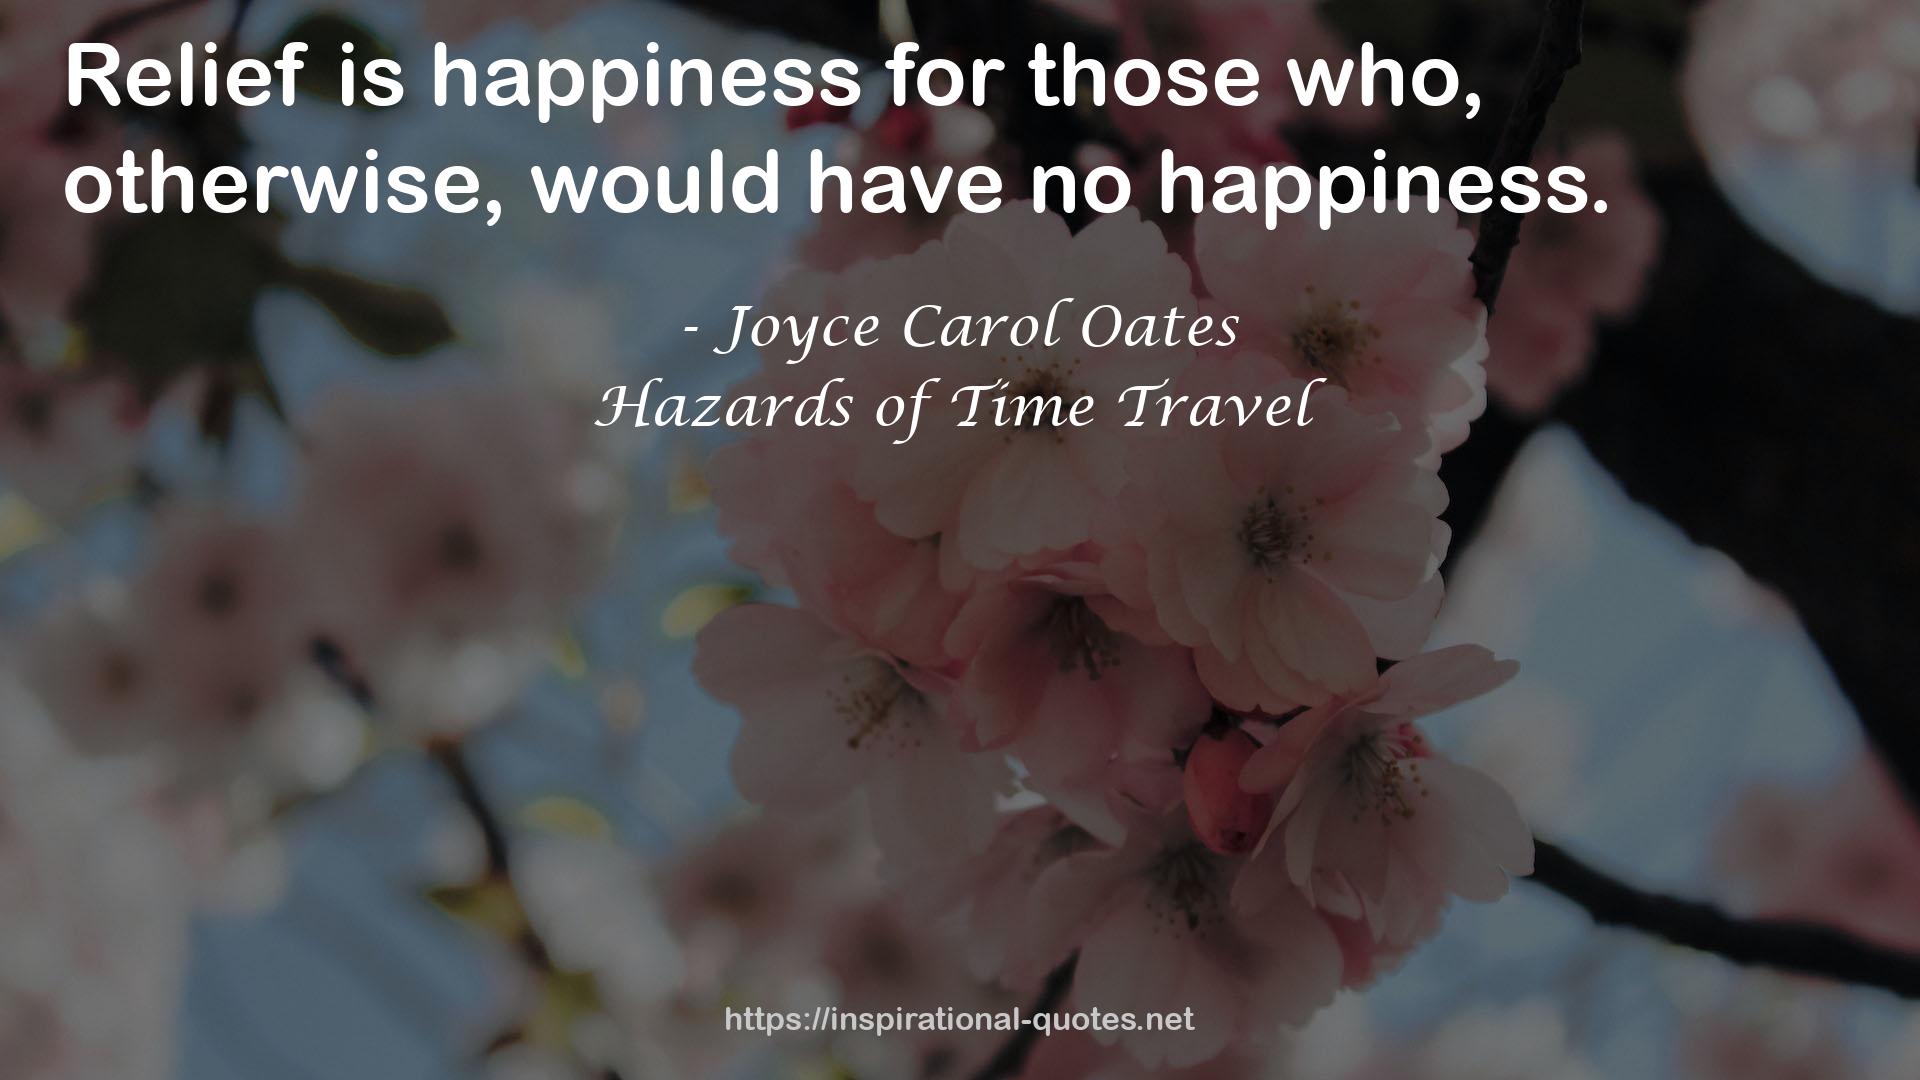 Hazards of Time Travel QUOTES